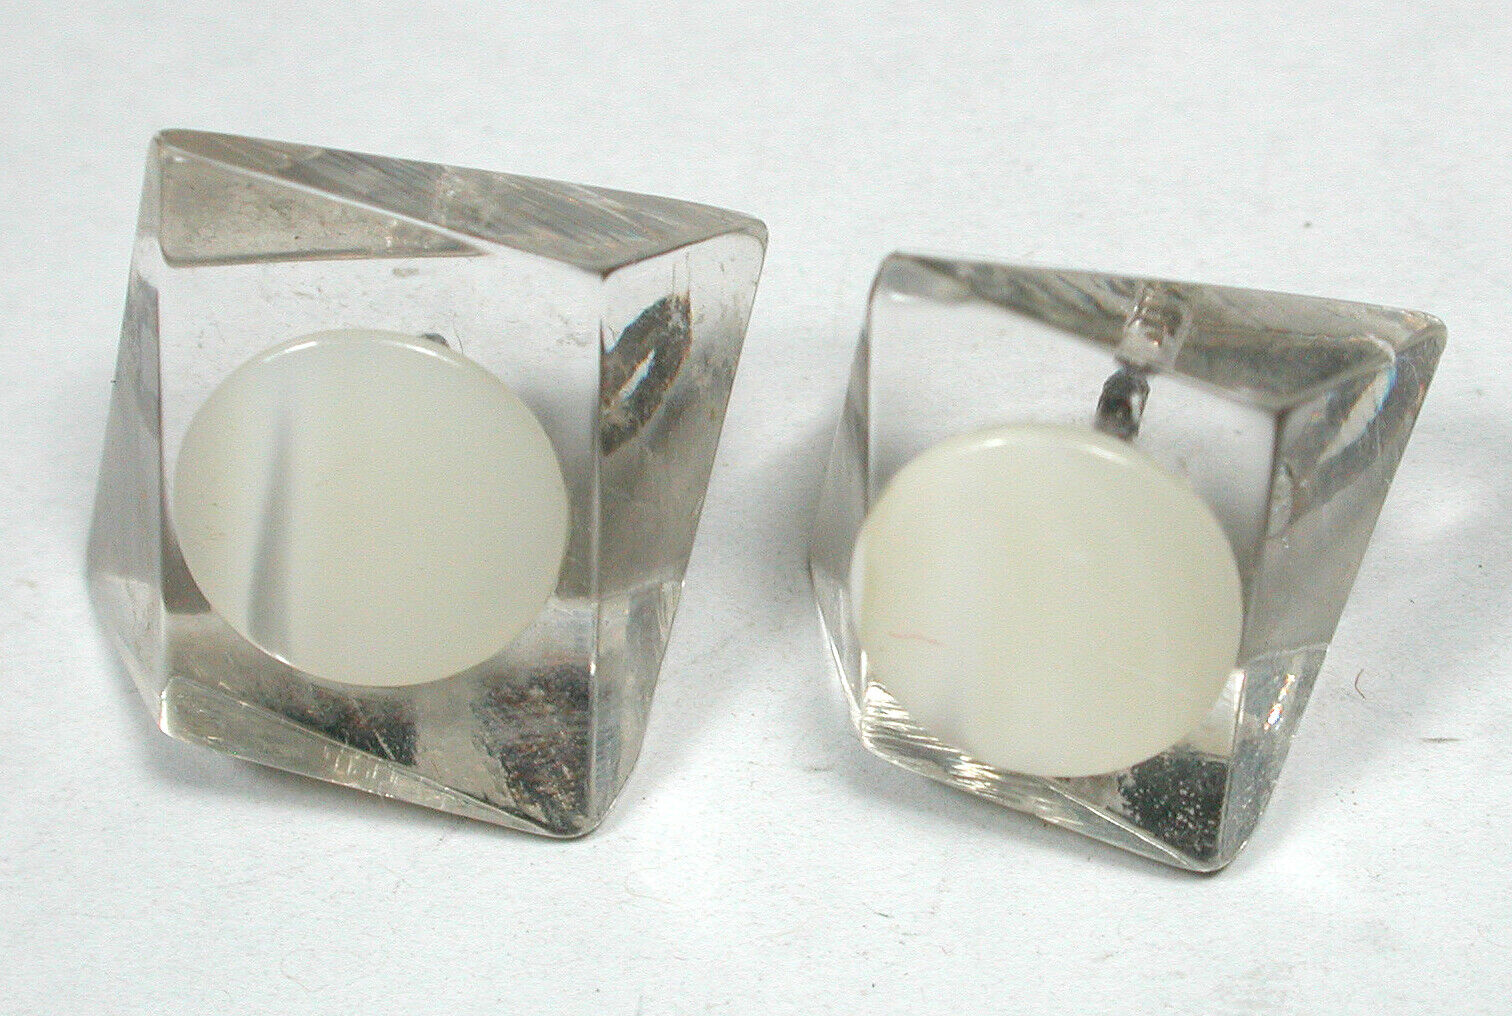 2 Vintage Lucite Buttons Lovely Carved Designs with White Dot Insert - 7/8 "